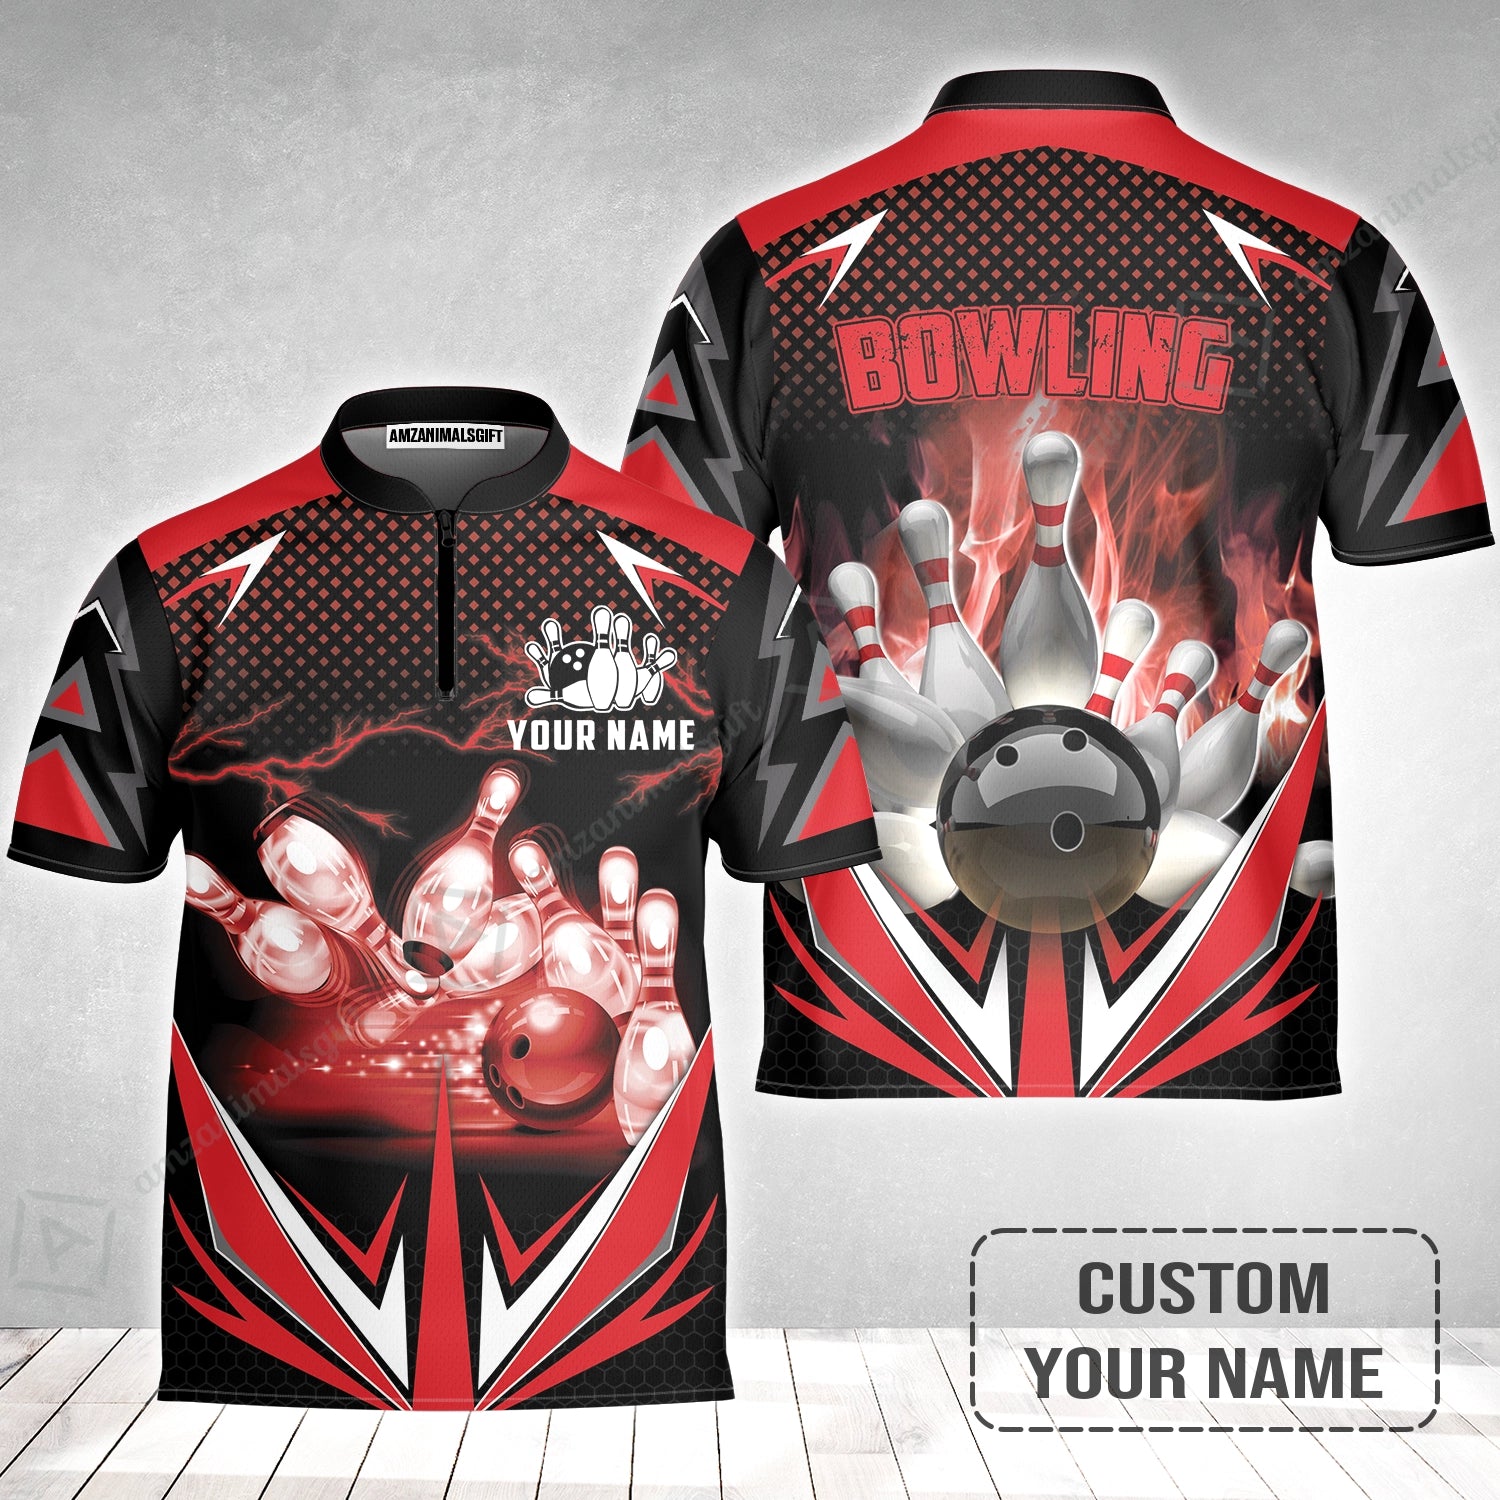 Customized Bowling Red Fire Jersey For Bowling Players, Bowling Team Uniform Shirts, Gift For Men, Bowling Lovers, Bowlers